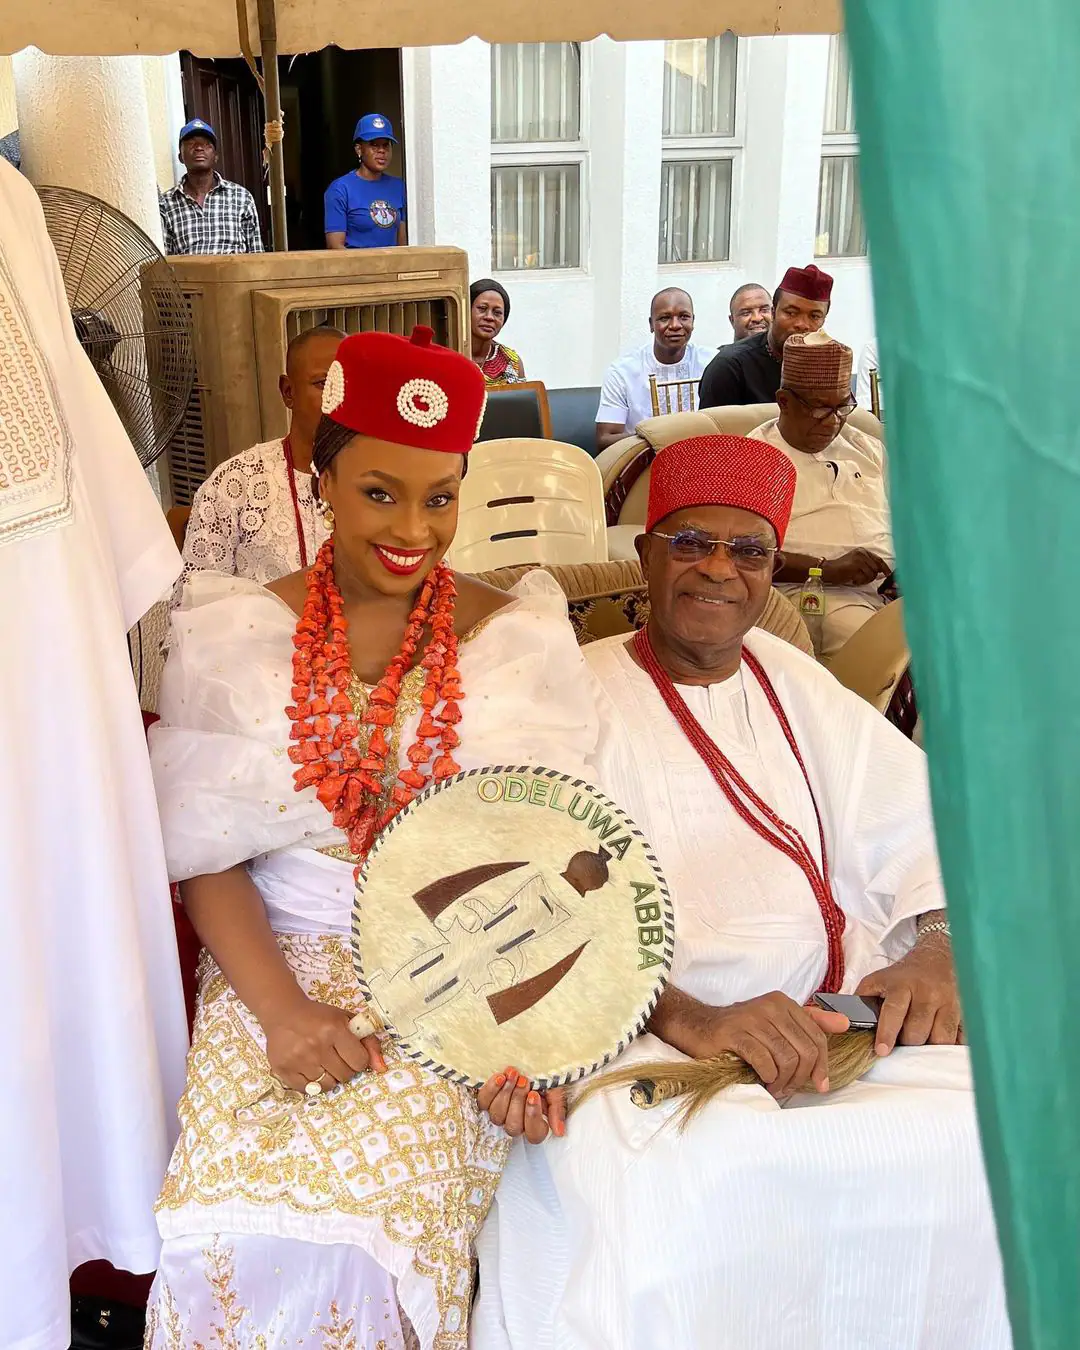 In Pictures & Video: Chimamanda Adichie Conferred With Chieftaincy Award, Makes Case For Women 4